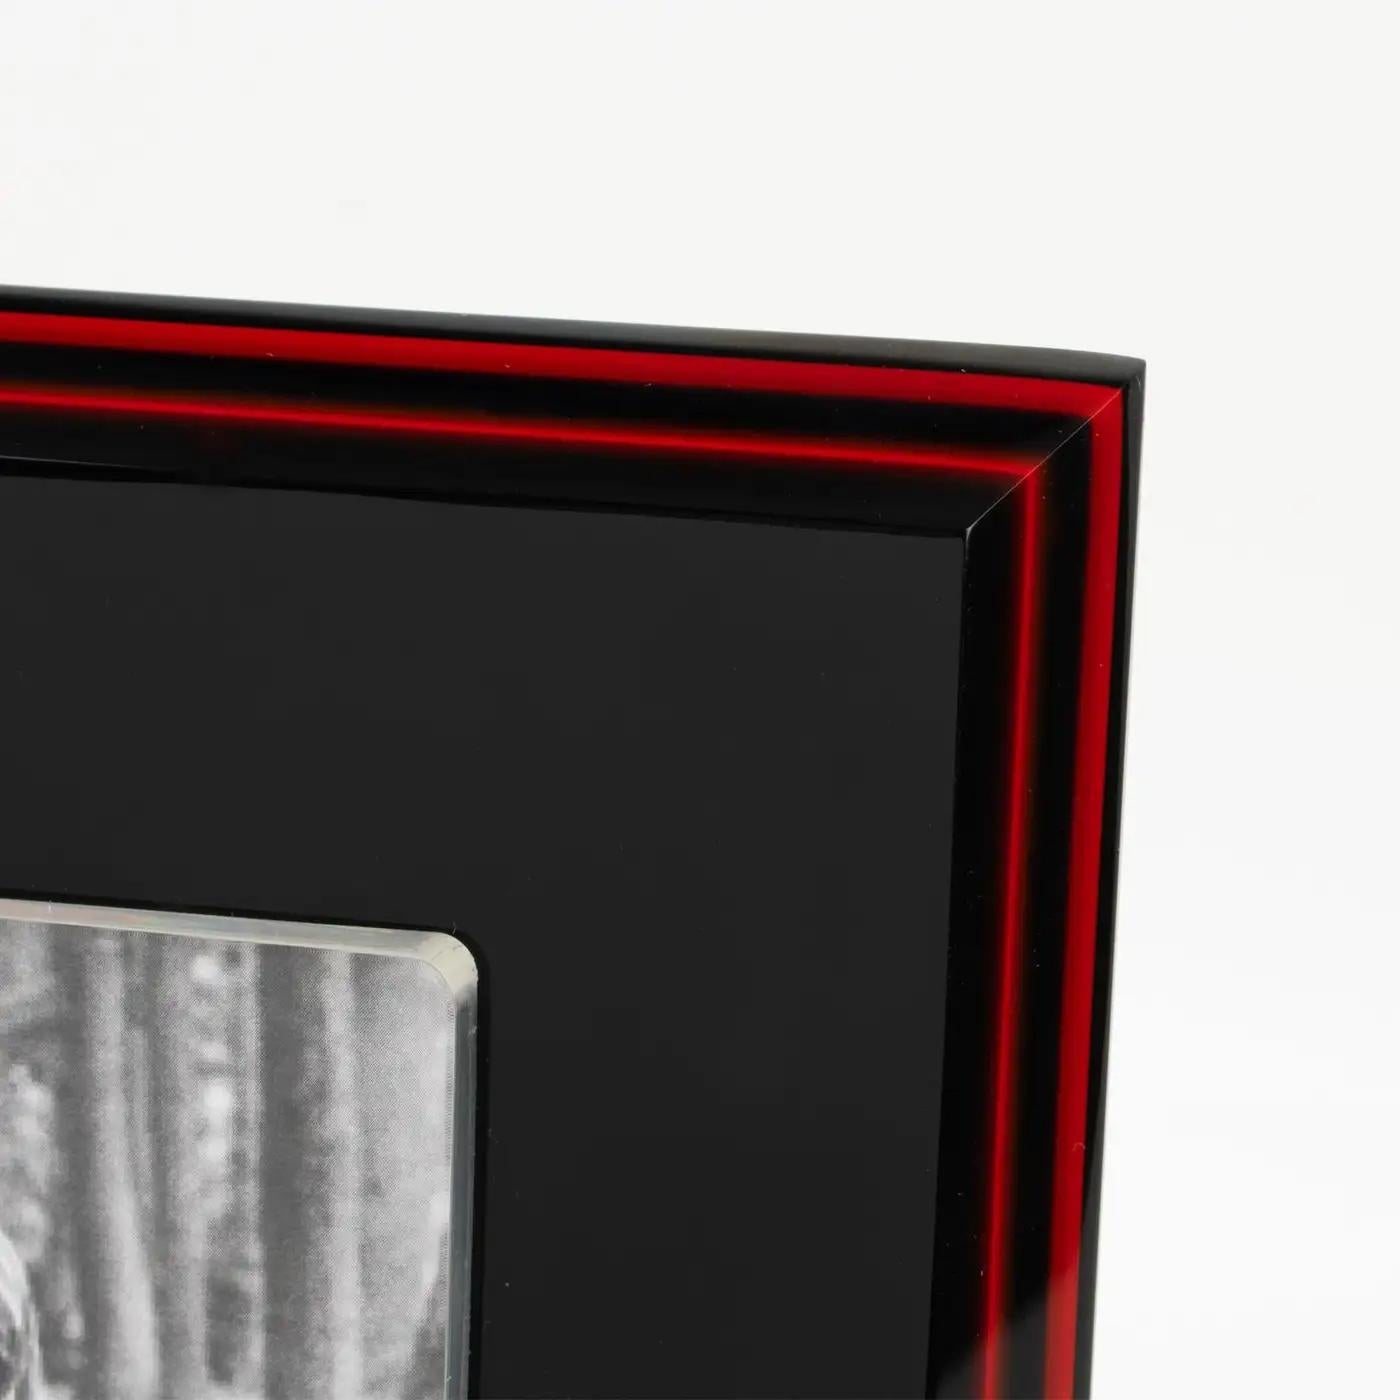 Acrylic Rede Guzzini Black and Red Lucite Picture Frame, Italy 1970s For Sale